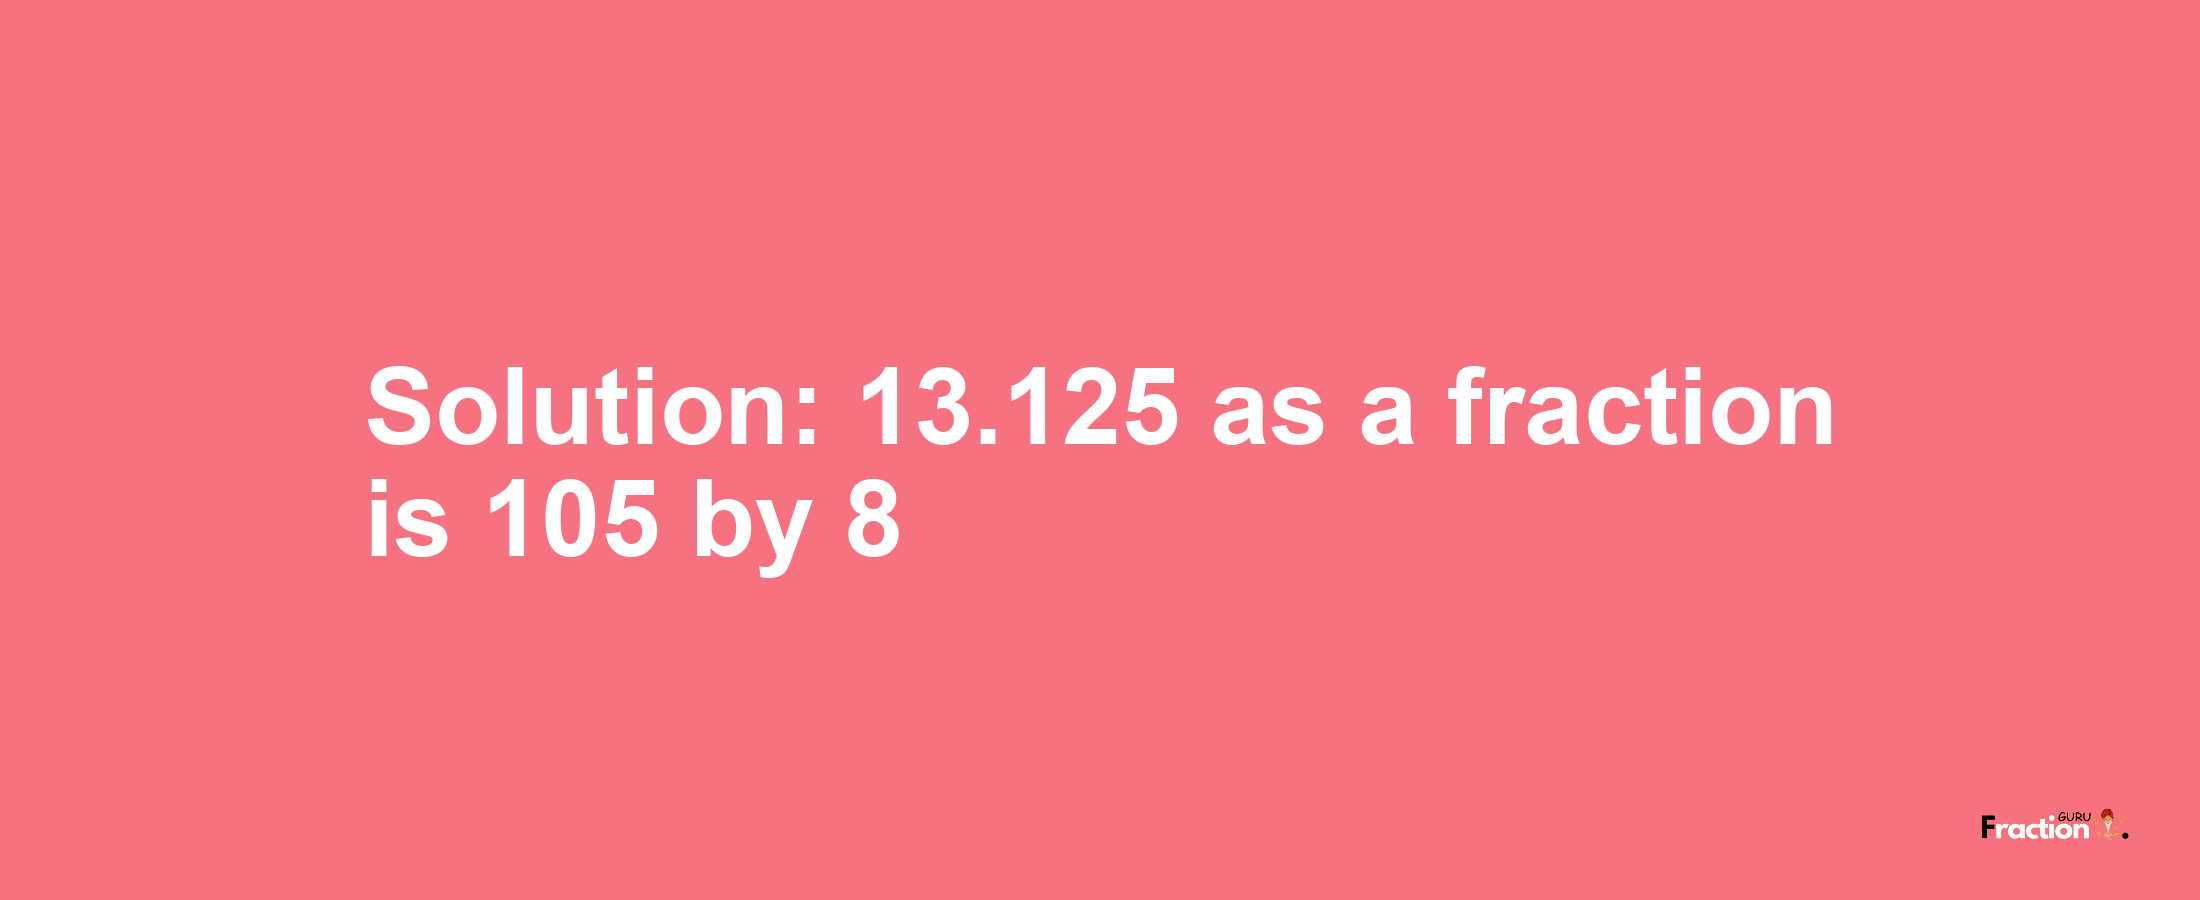 Solution:13.125 as a fraction is 105/8